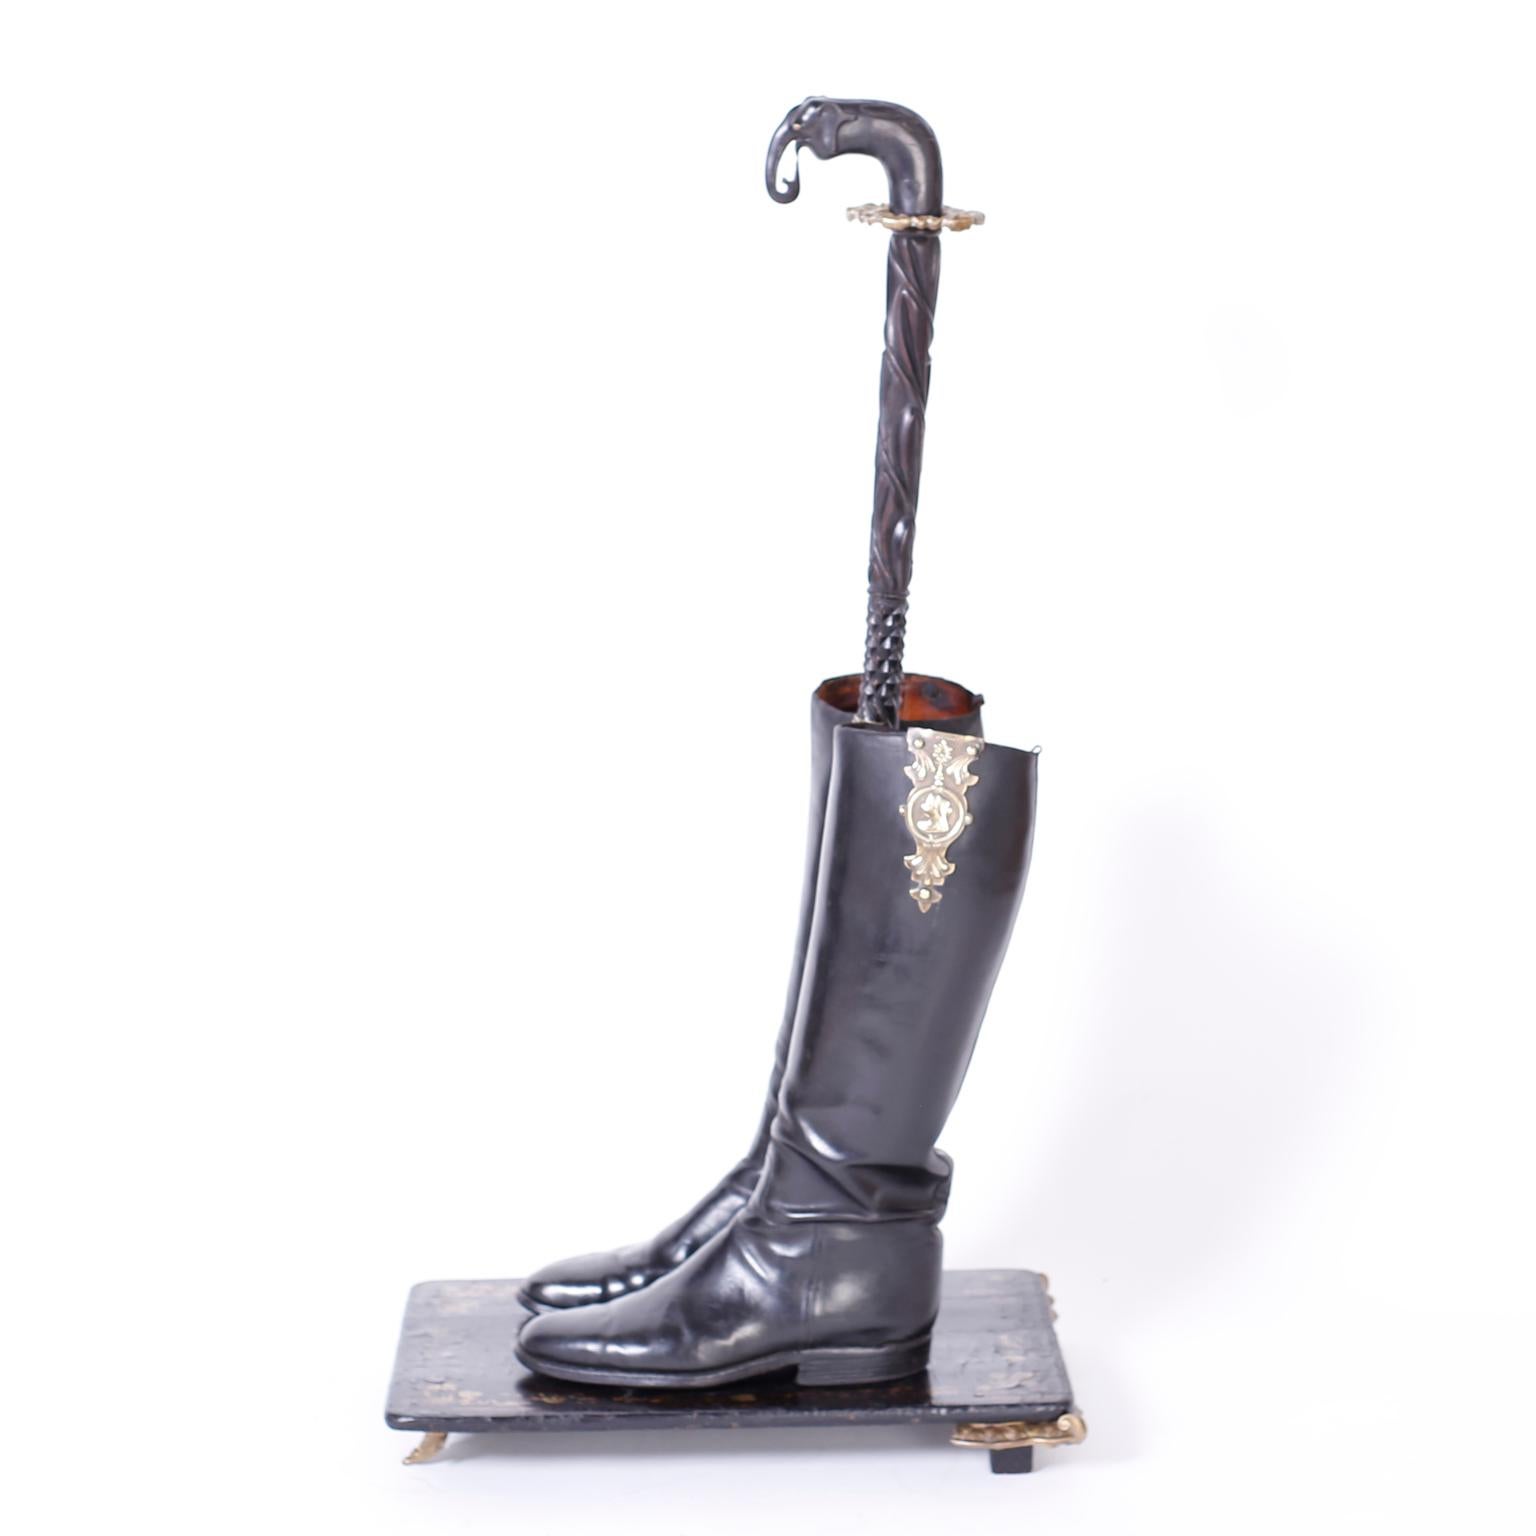 English antique cane or umbrella stand that crosses the line between art and function by assembling two Victorian black leather boots on a Chinese lacquer remnant with antique brass remnants as feet. The handle is an antique Anglo Indian carved cane